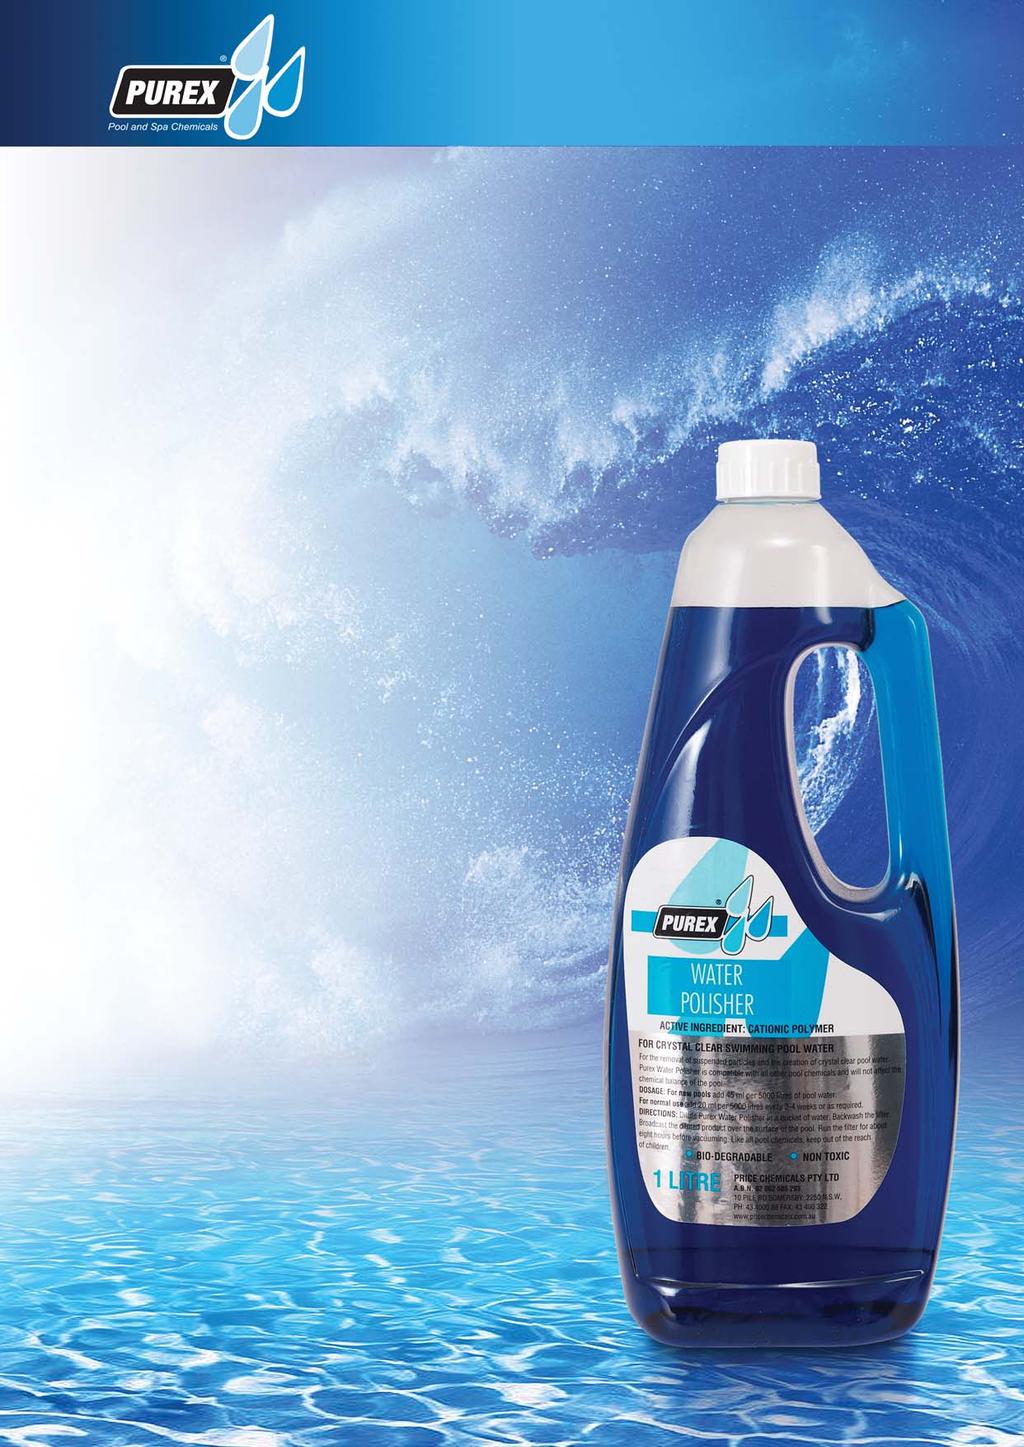 PUREX WATER POLISHER Cationic Polymer Inground & Aboveground Pools/Spas & Hot Tubs For the removal of suspended particles and the creation of crystal clear pool & spa water Murky cloudy water Dilute